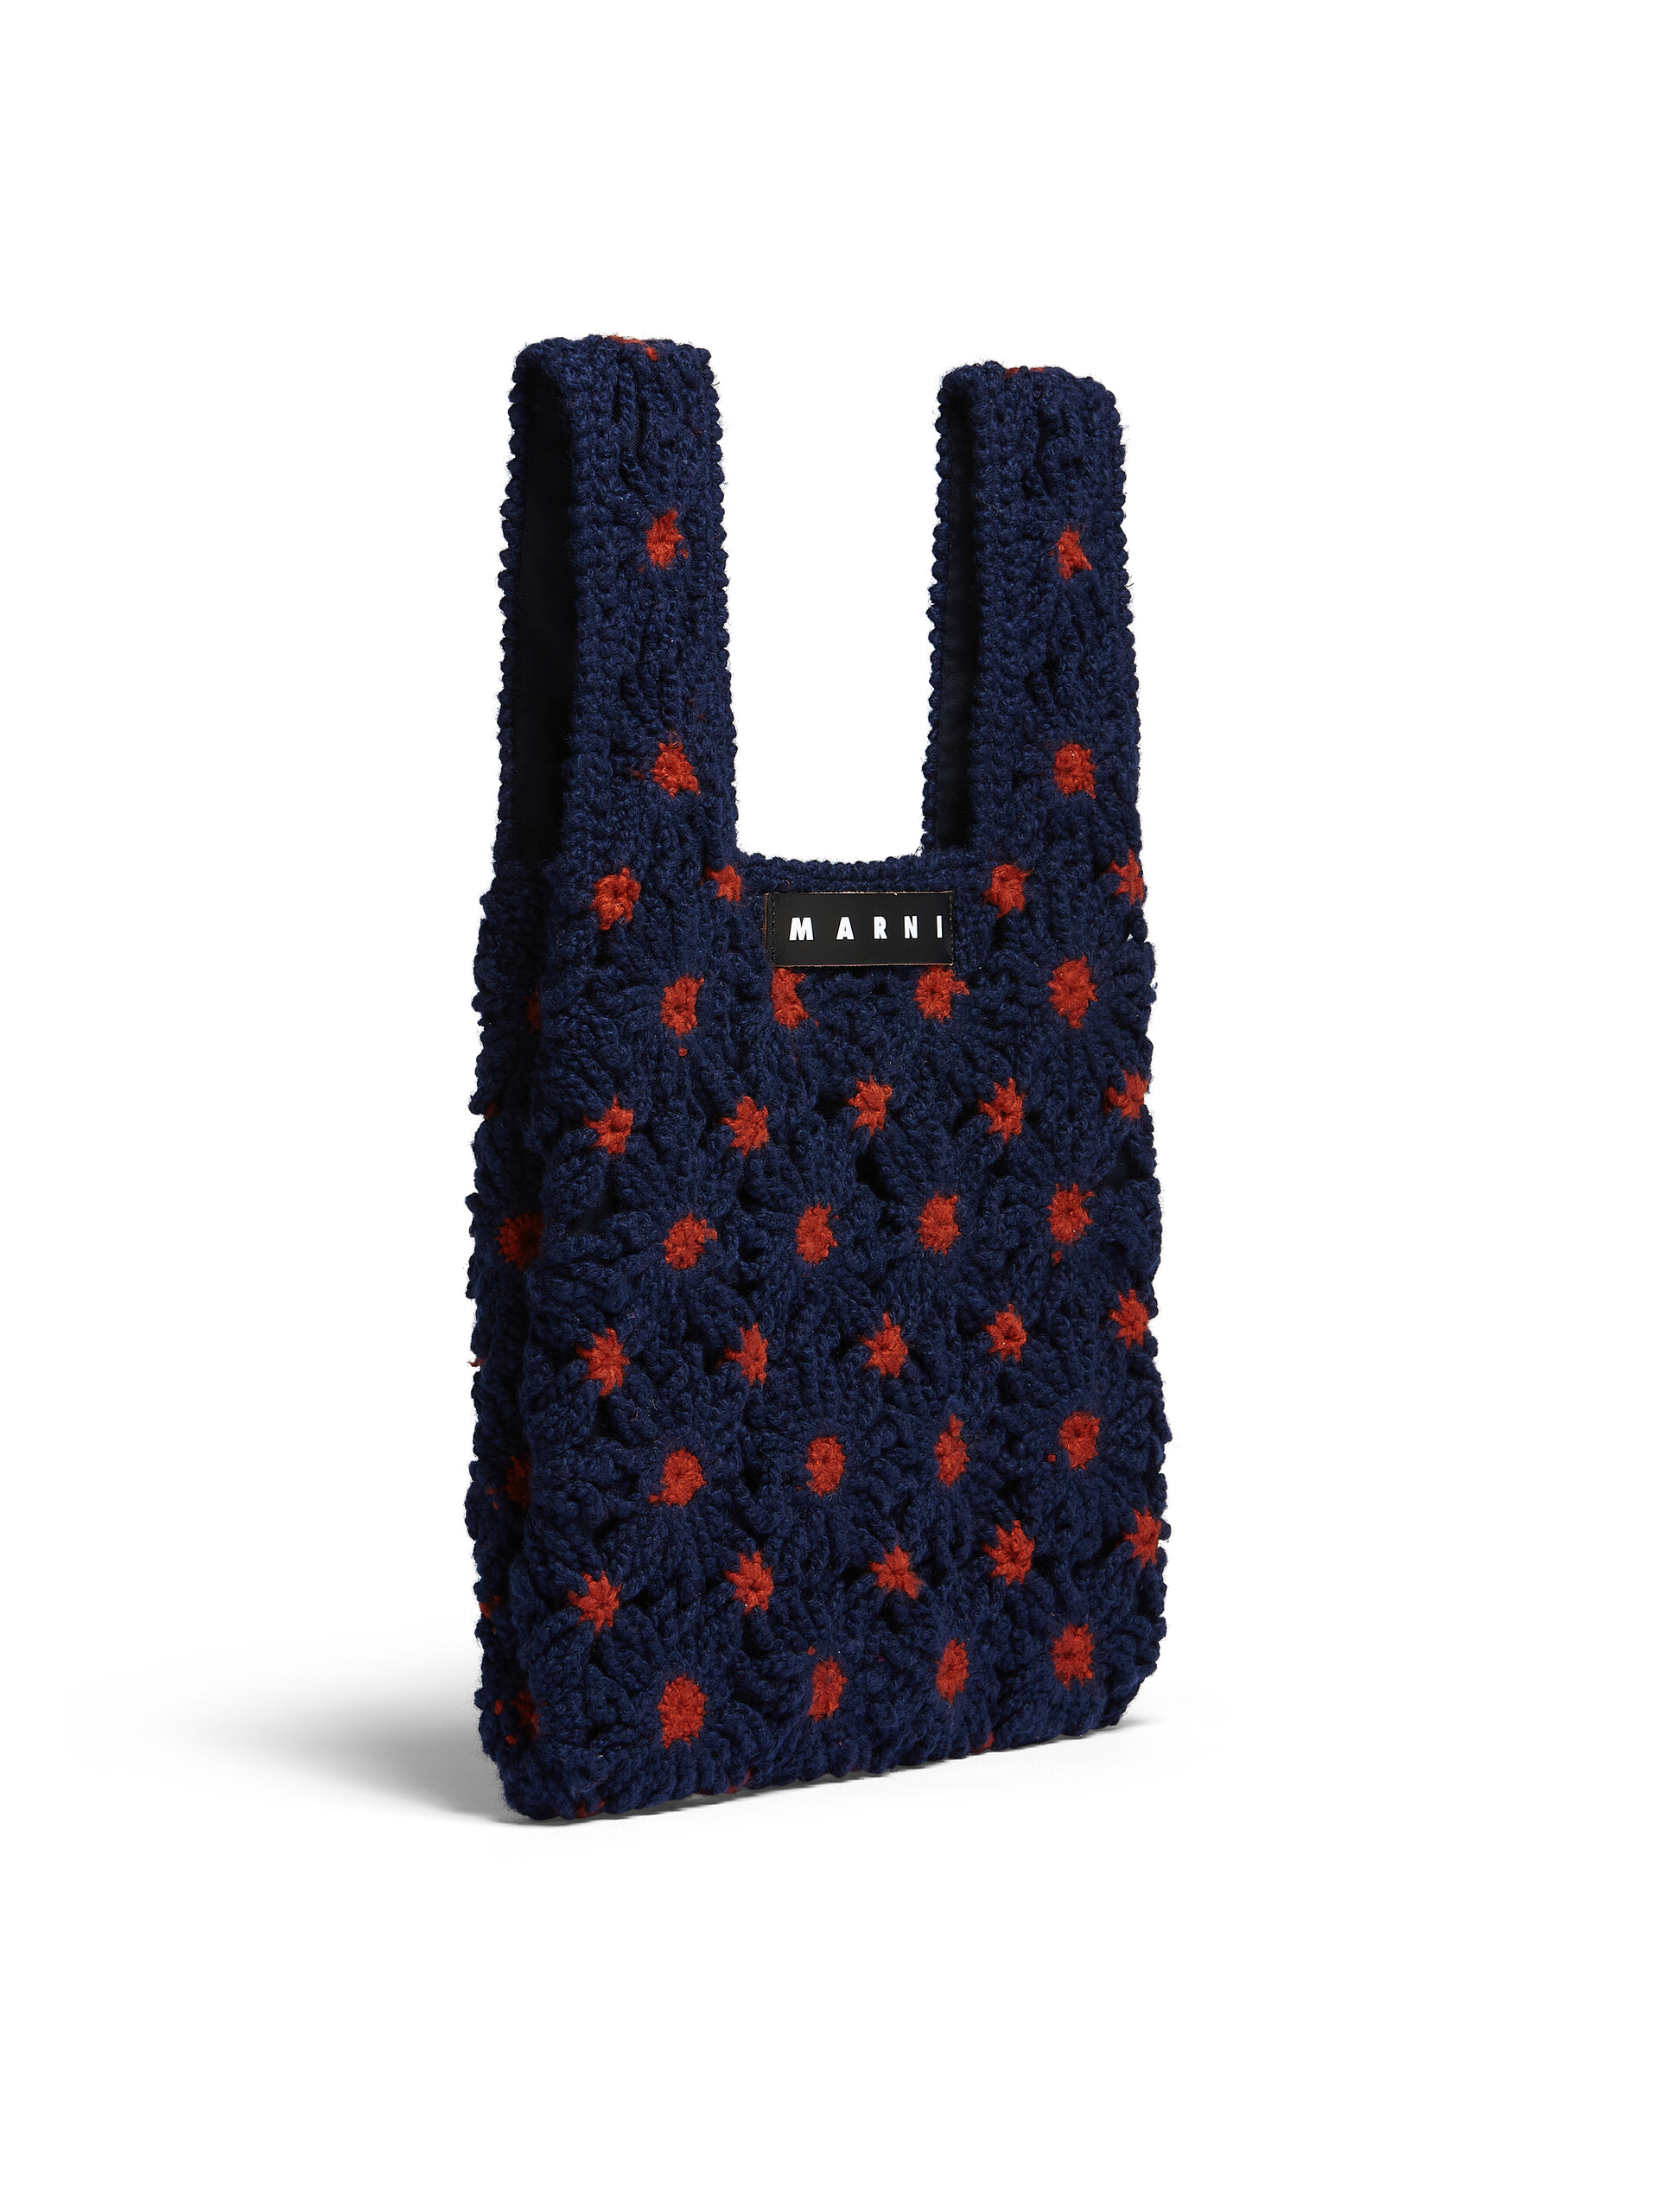 MARNI MARKET FISH bag in blue and red crochet - Bags - Image 2